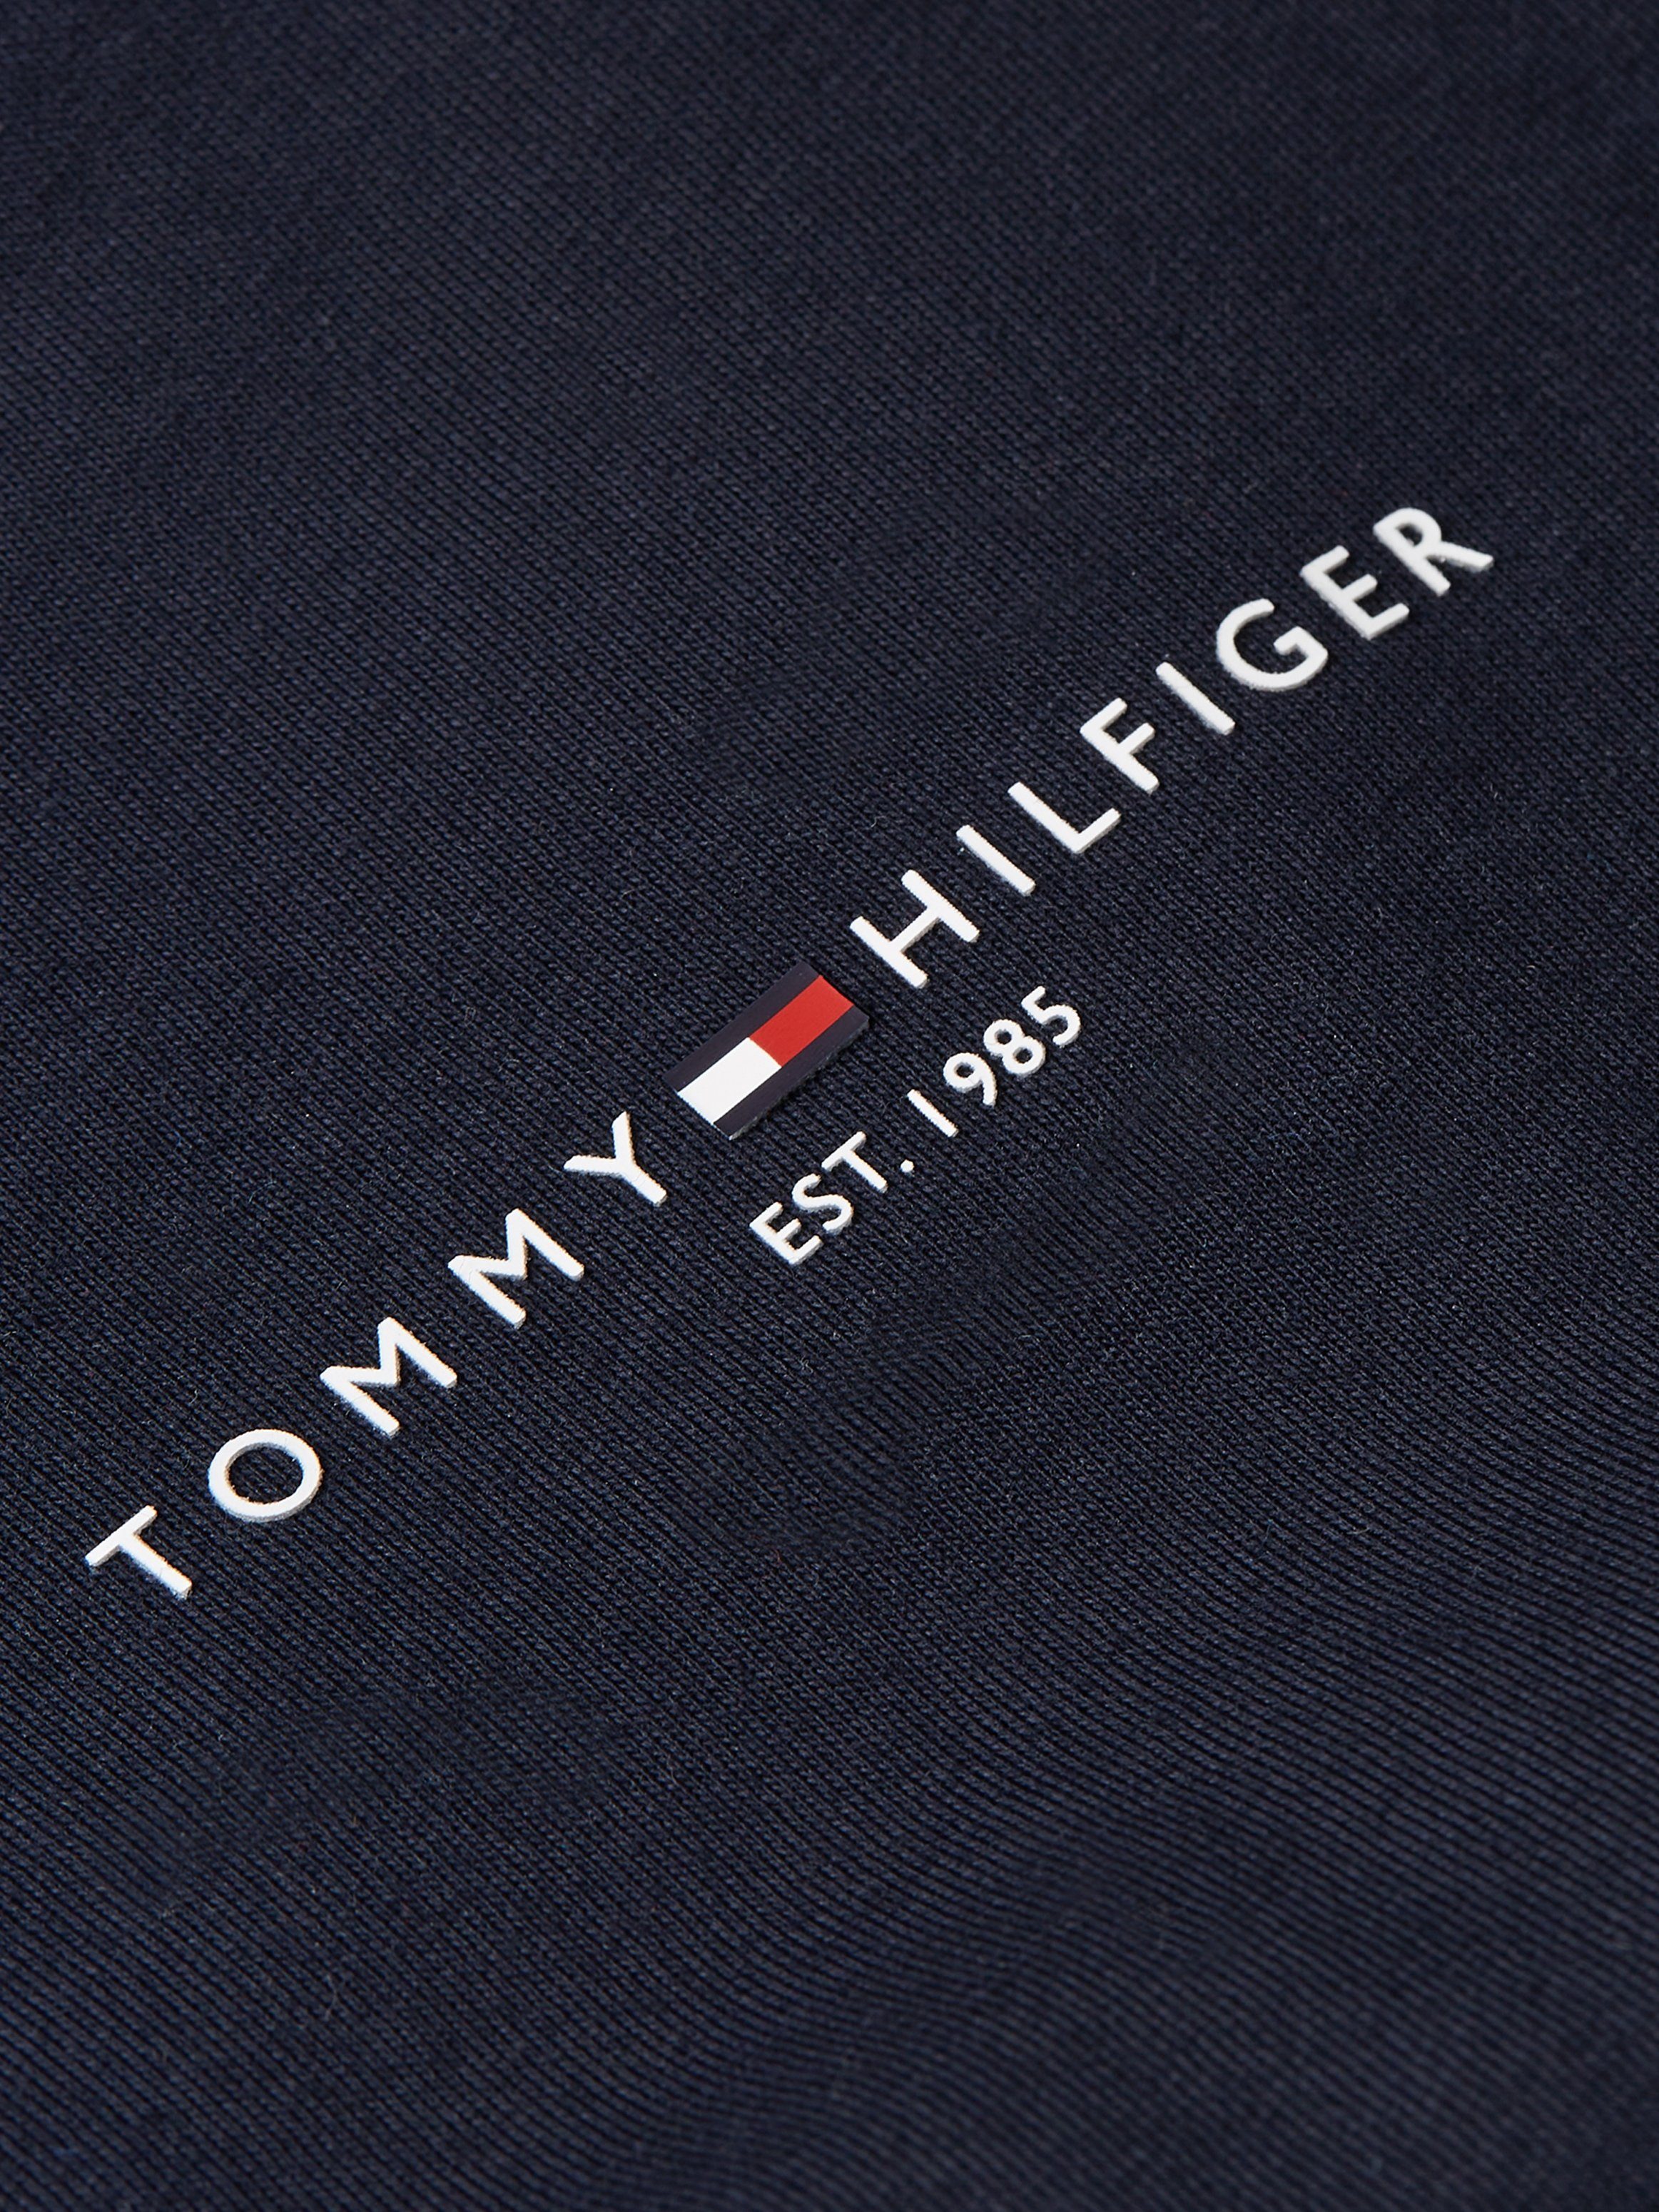 Tommy Hilfiger LOGO TOMMY Desert TIPPED T-Shirt TEE Sky